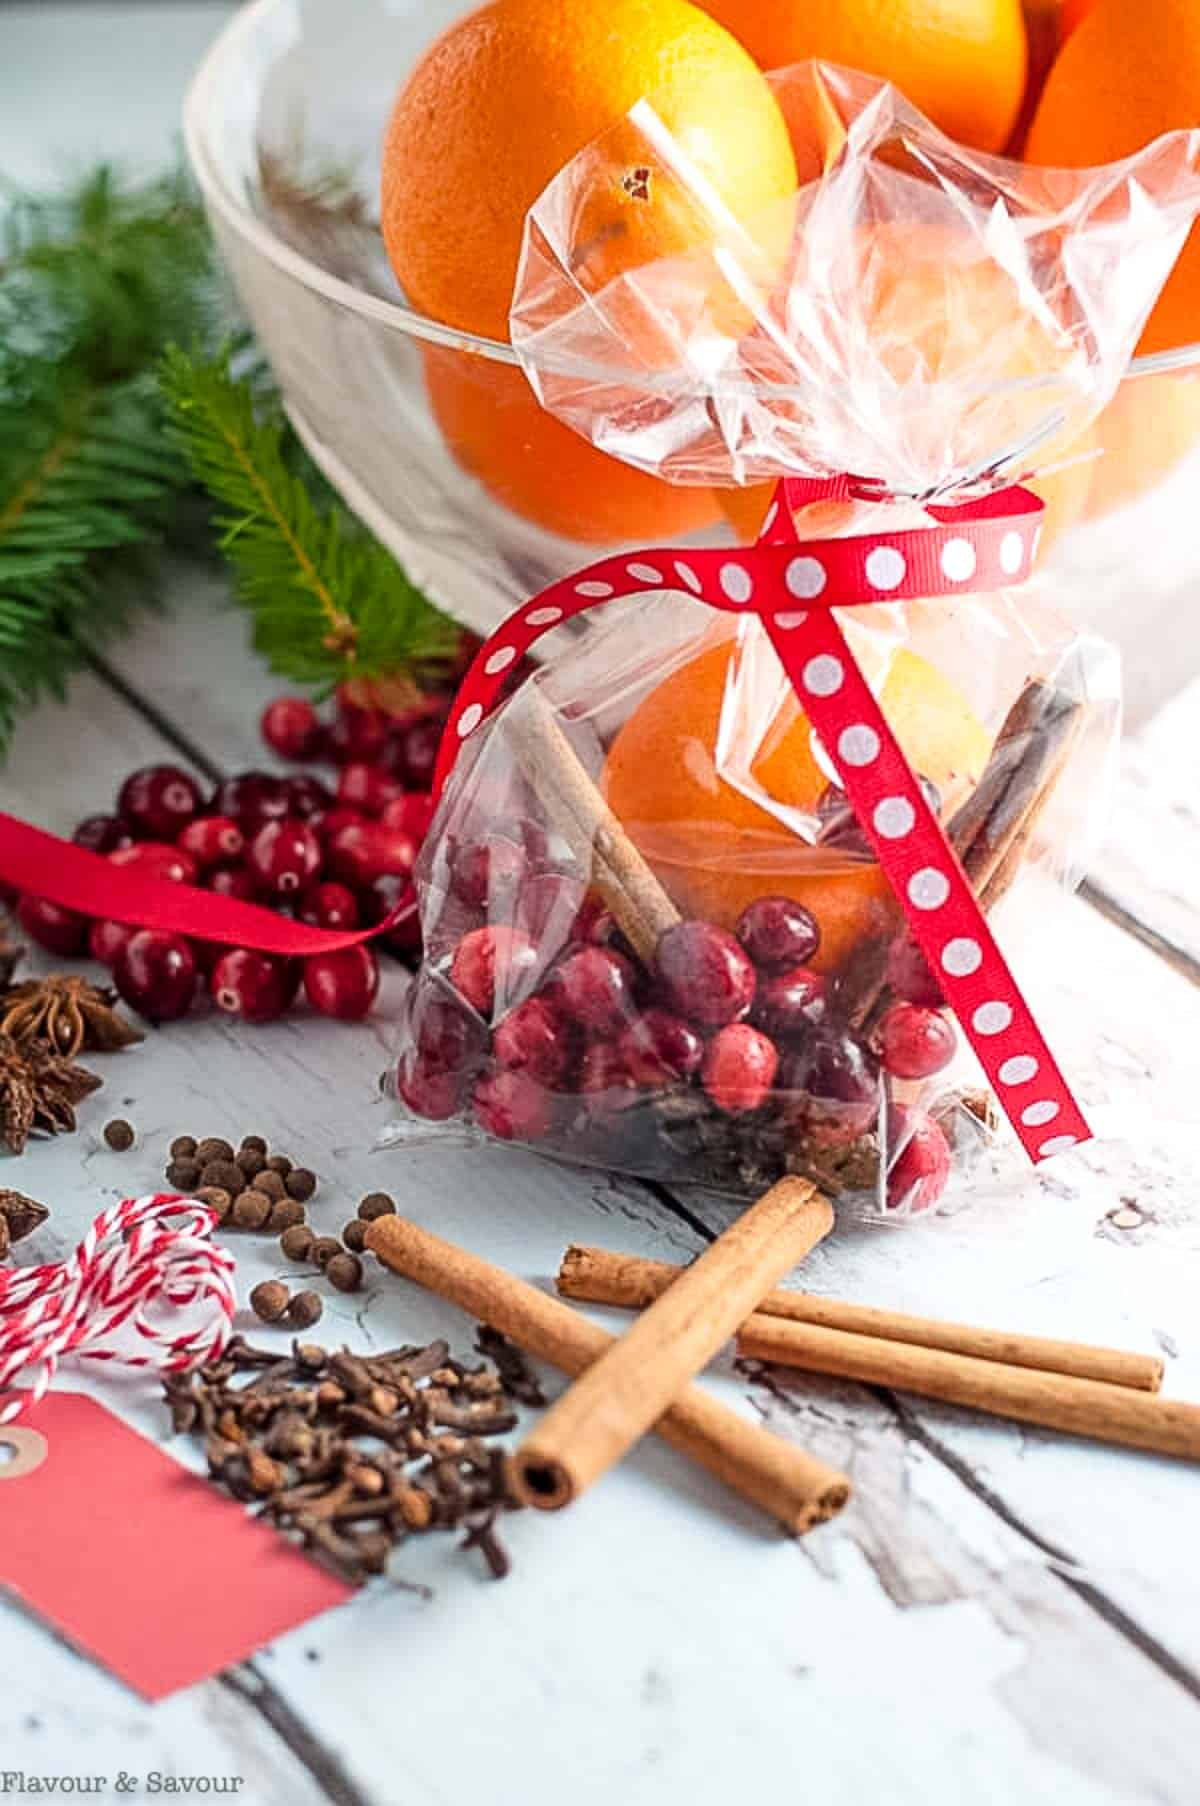 Packaged holiday potpourri with spices, orange and cranberries.